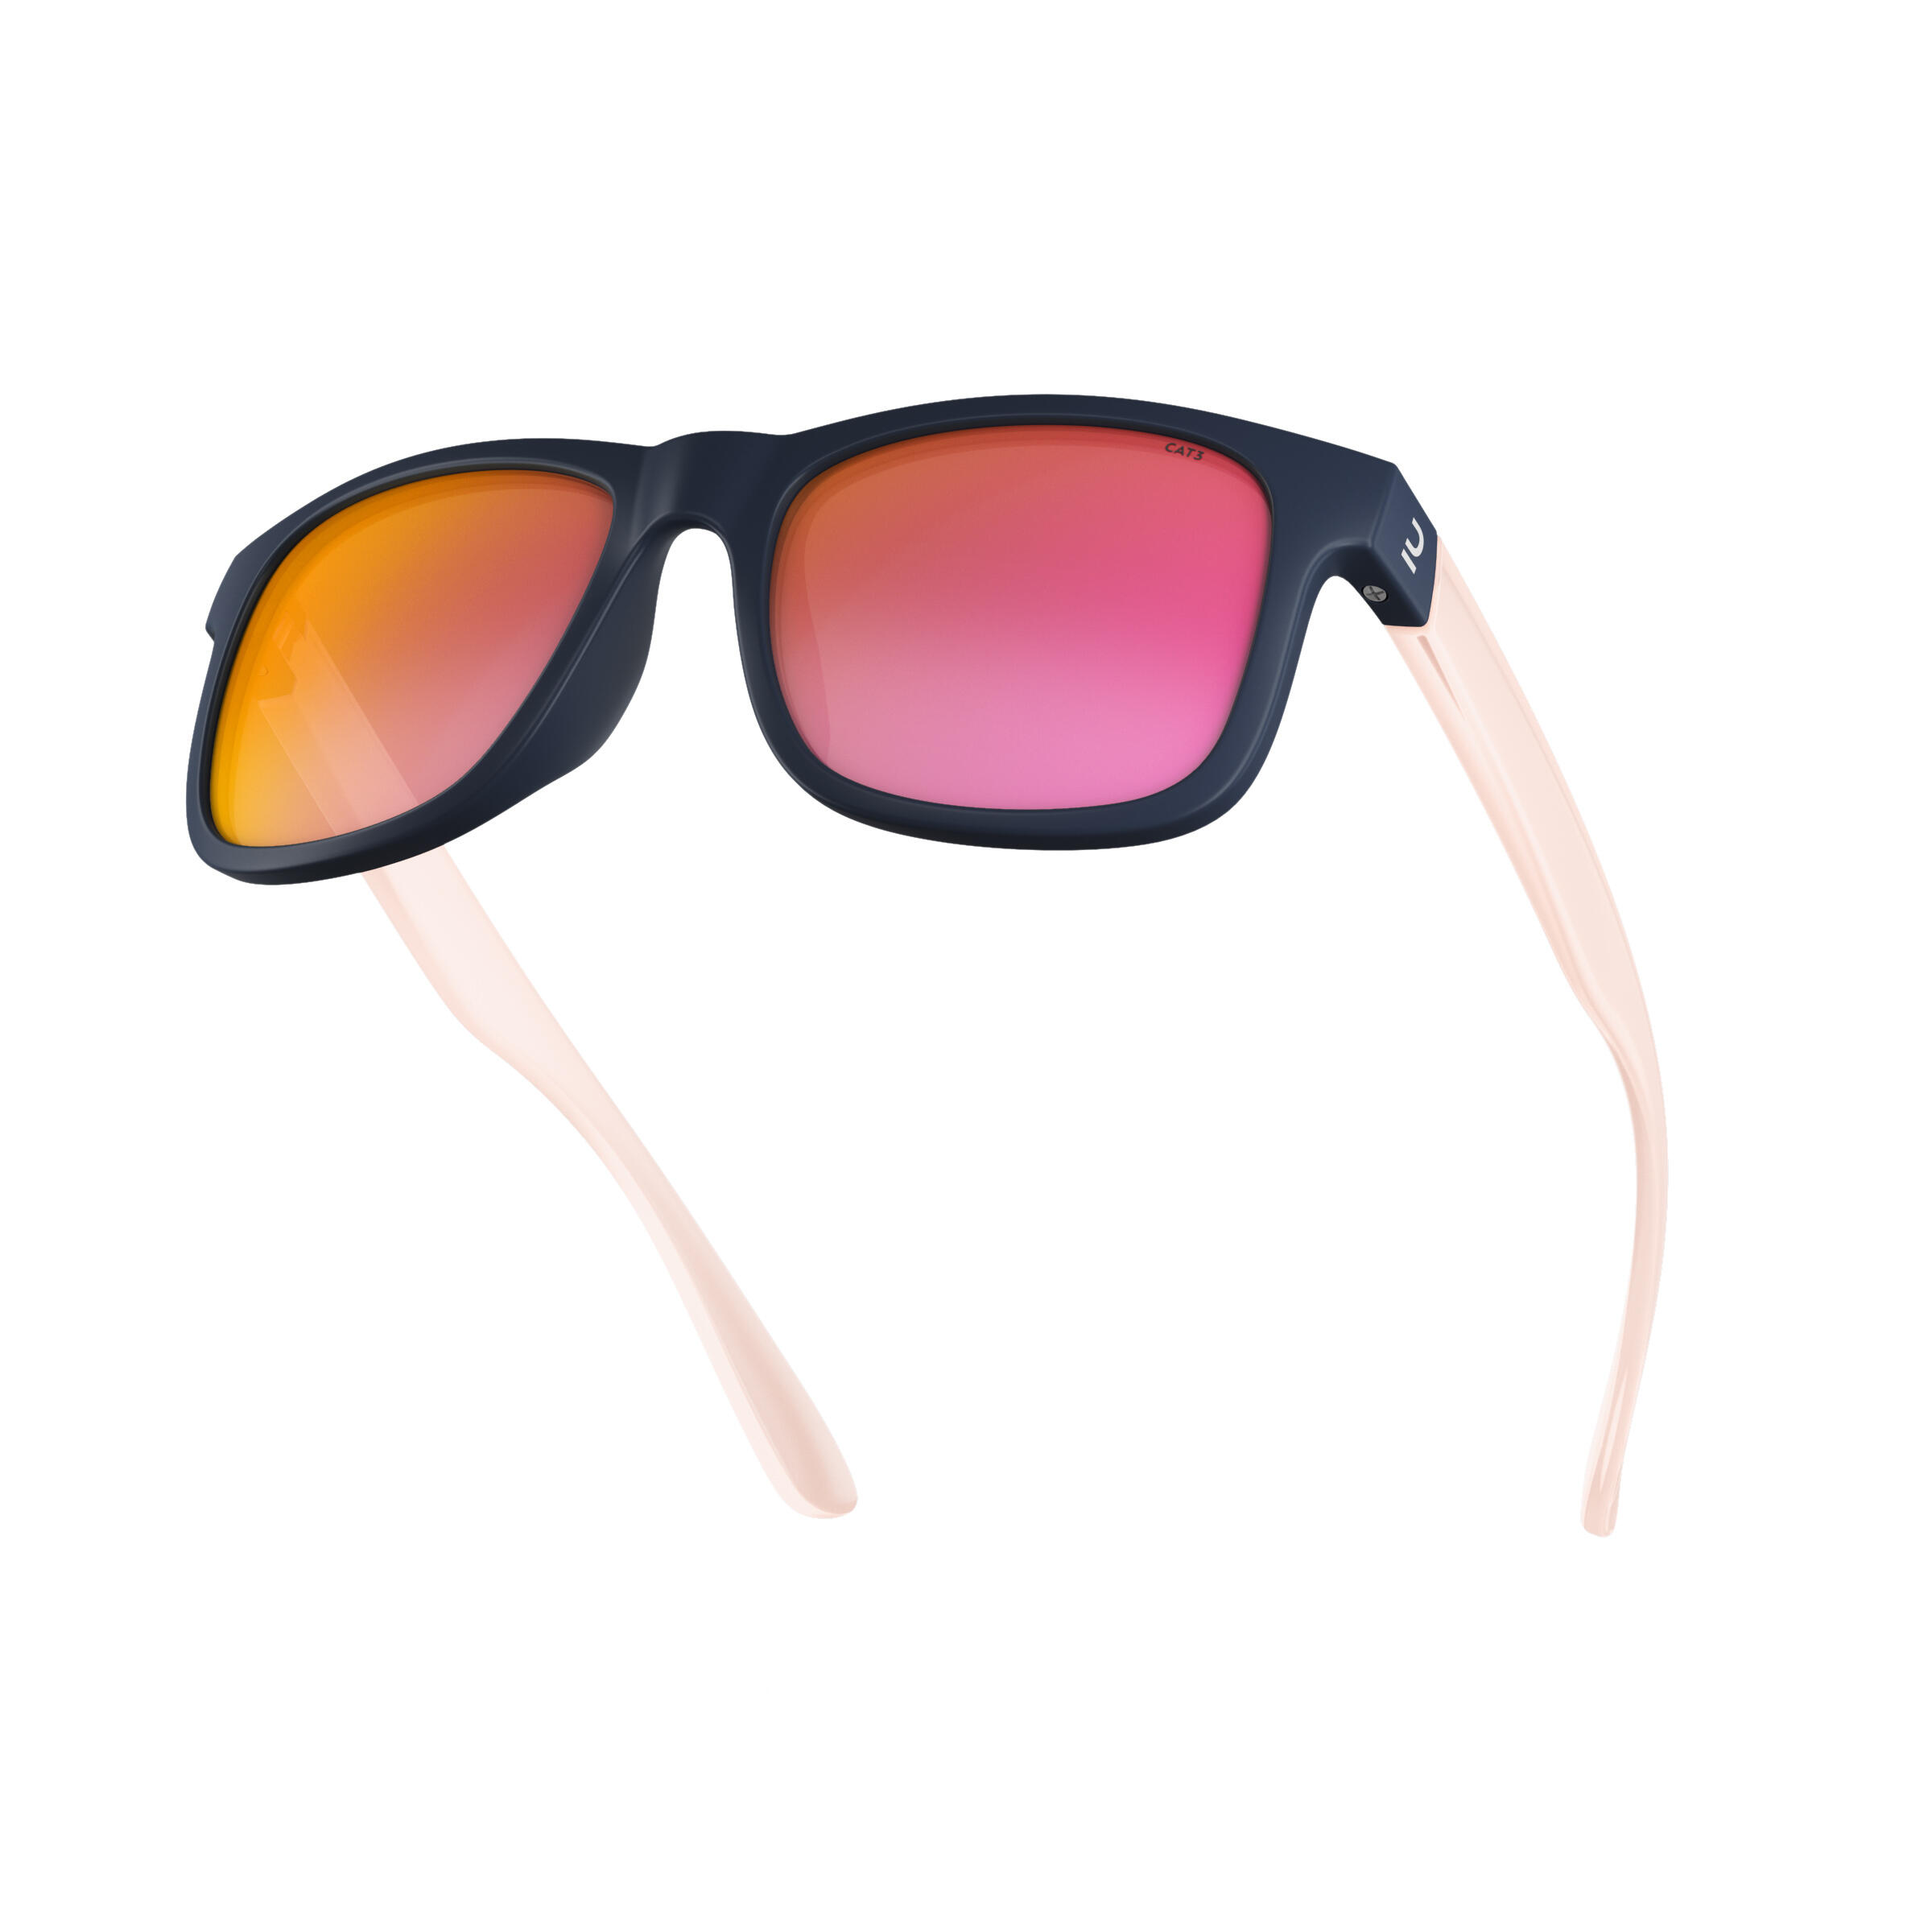 Hiking sunglasses - MH T140 - Children’s age 10 - Category 3 blue 8/10